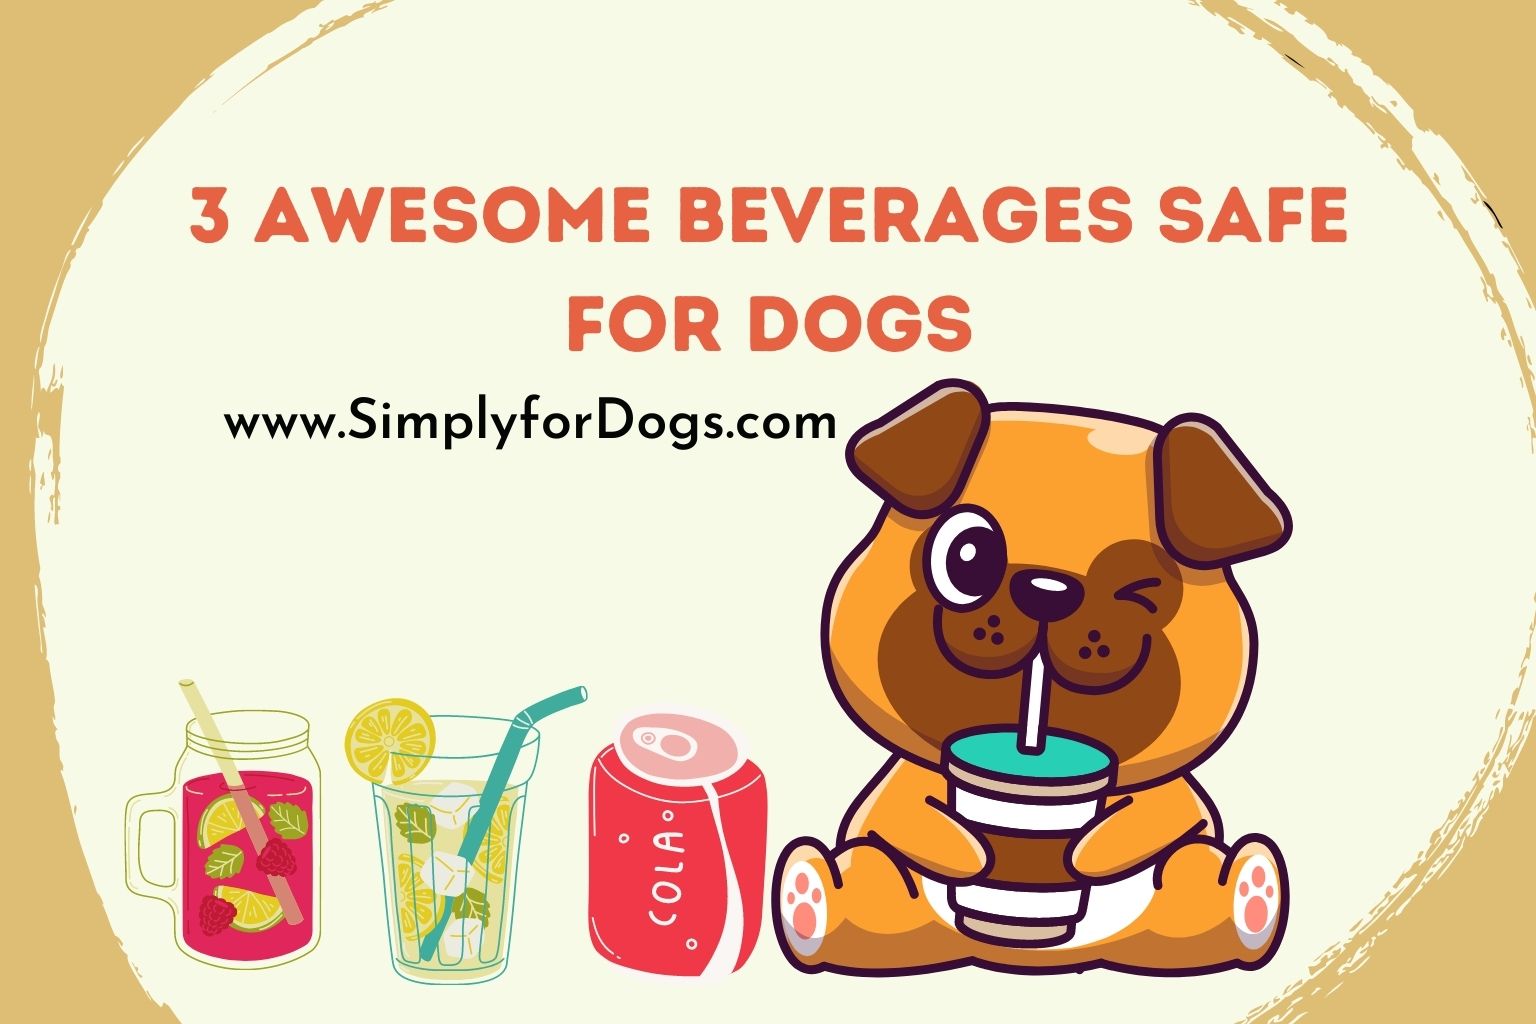 3 Awesome Beverages Safe for Dogs